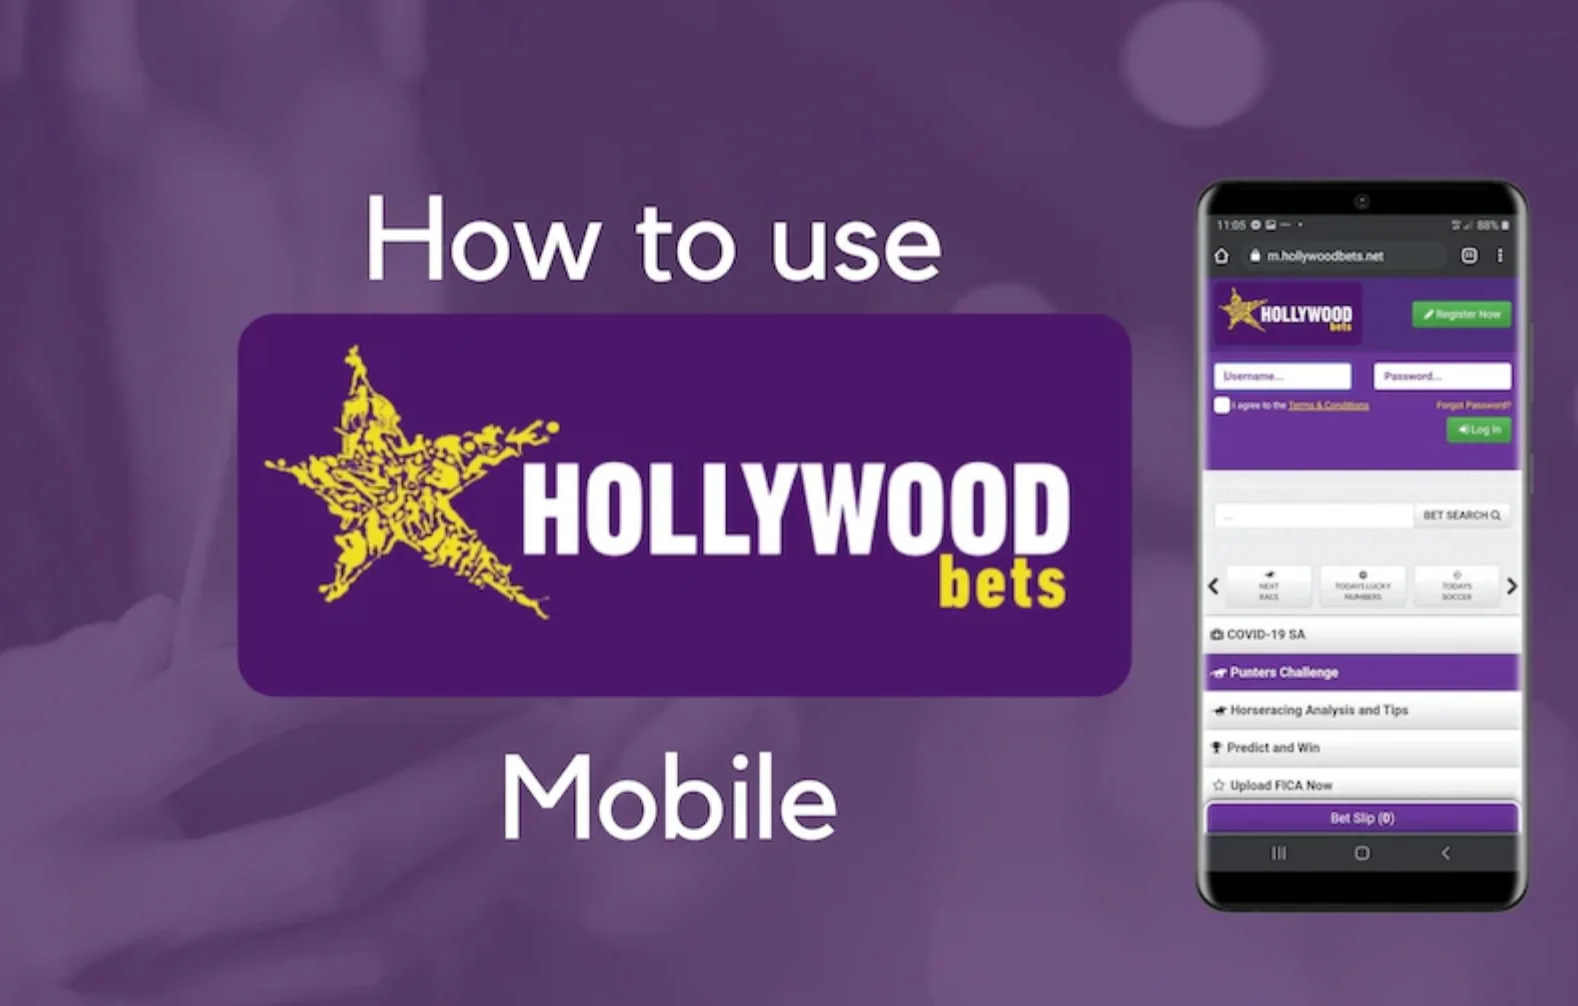 Hollywoodbets Mobile